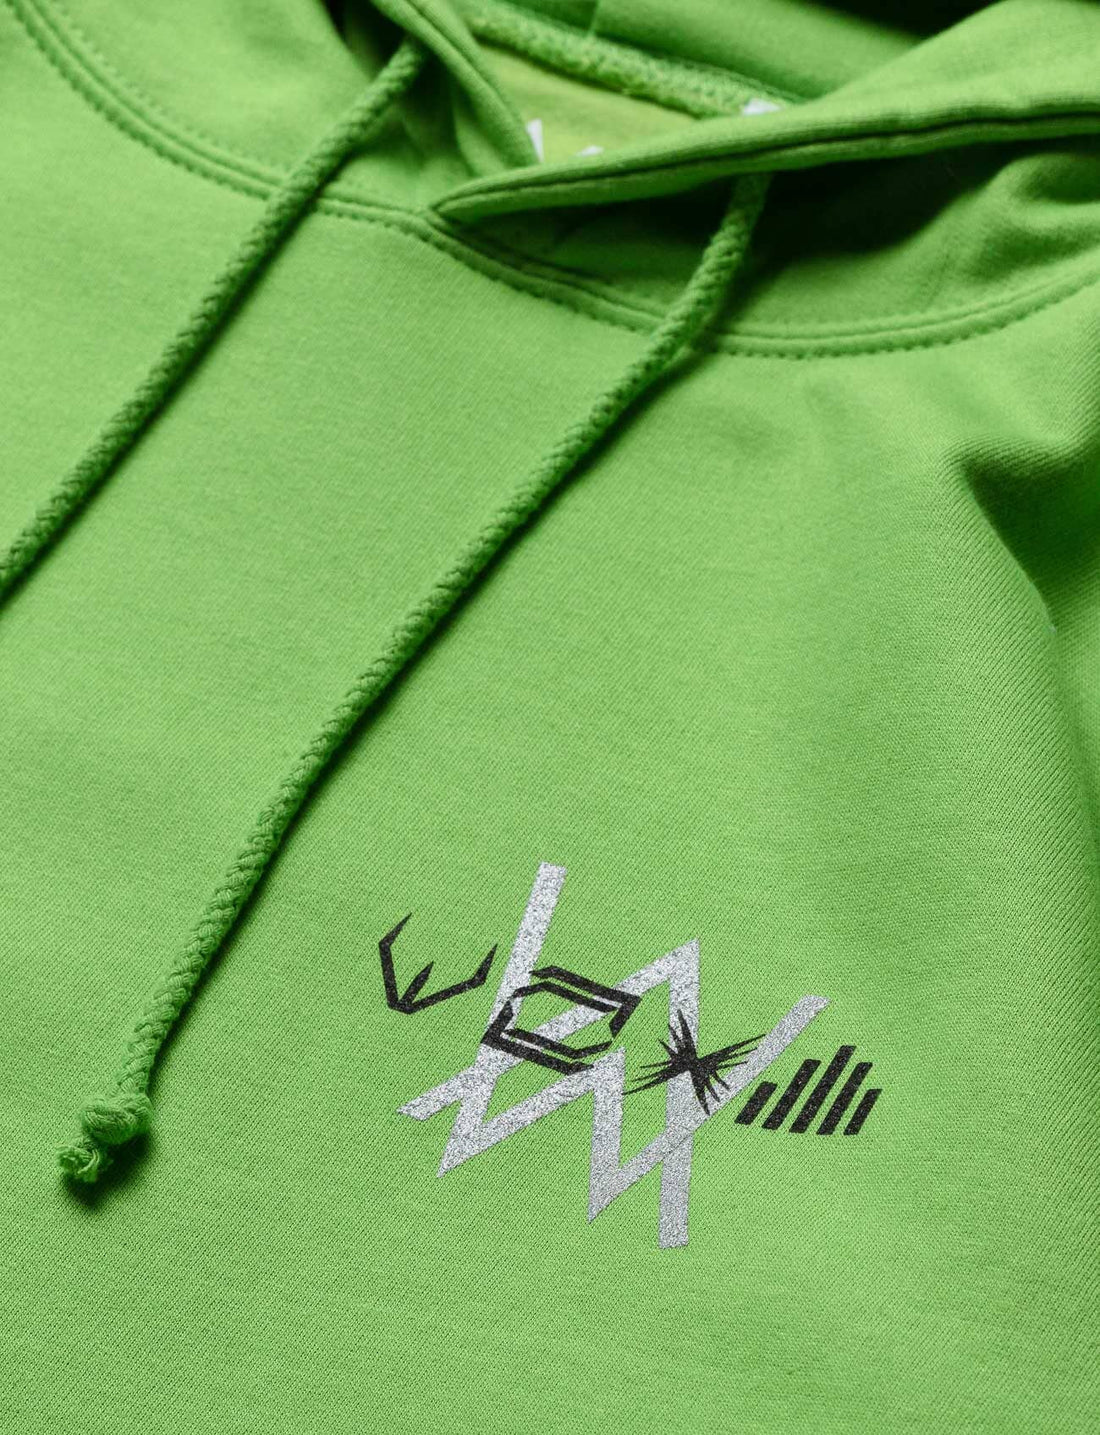 Detailed embroidery of Alan Walker's logo on the green Stage Hoodie, highlighting quality craftsmanship.